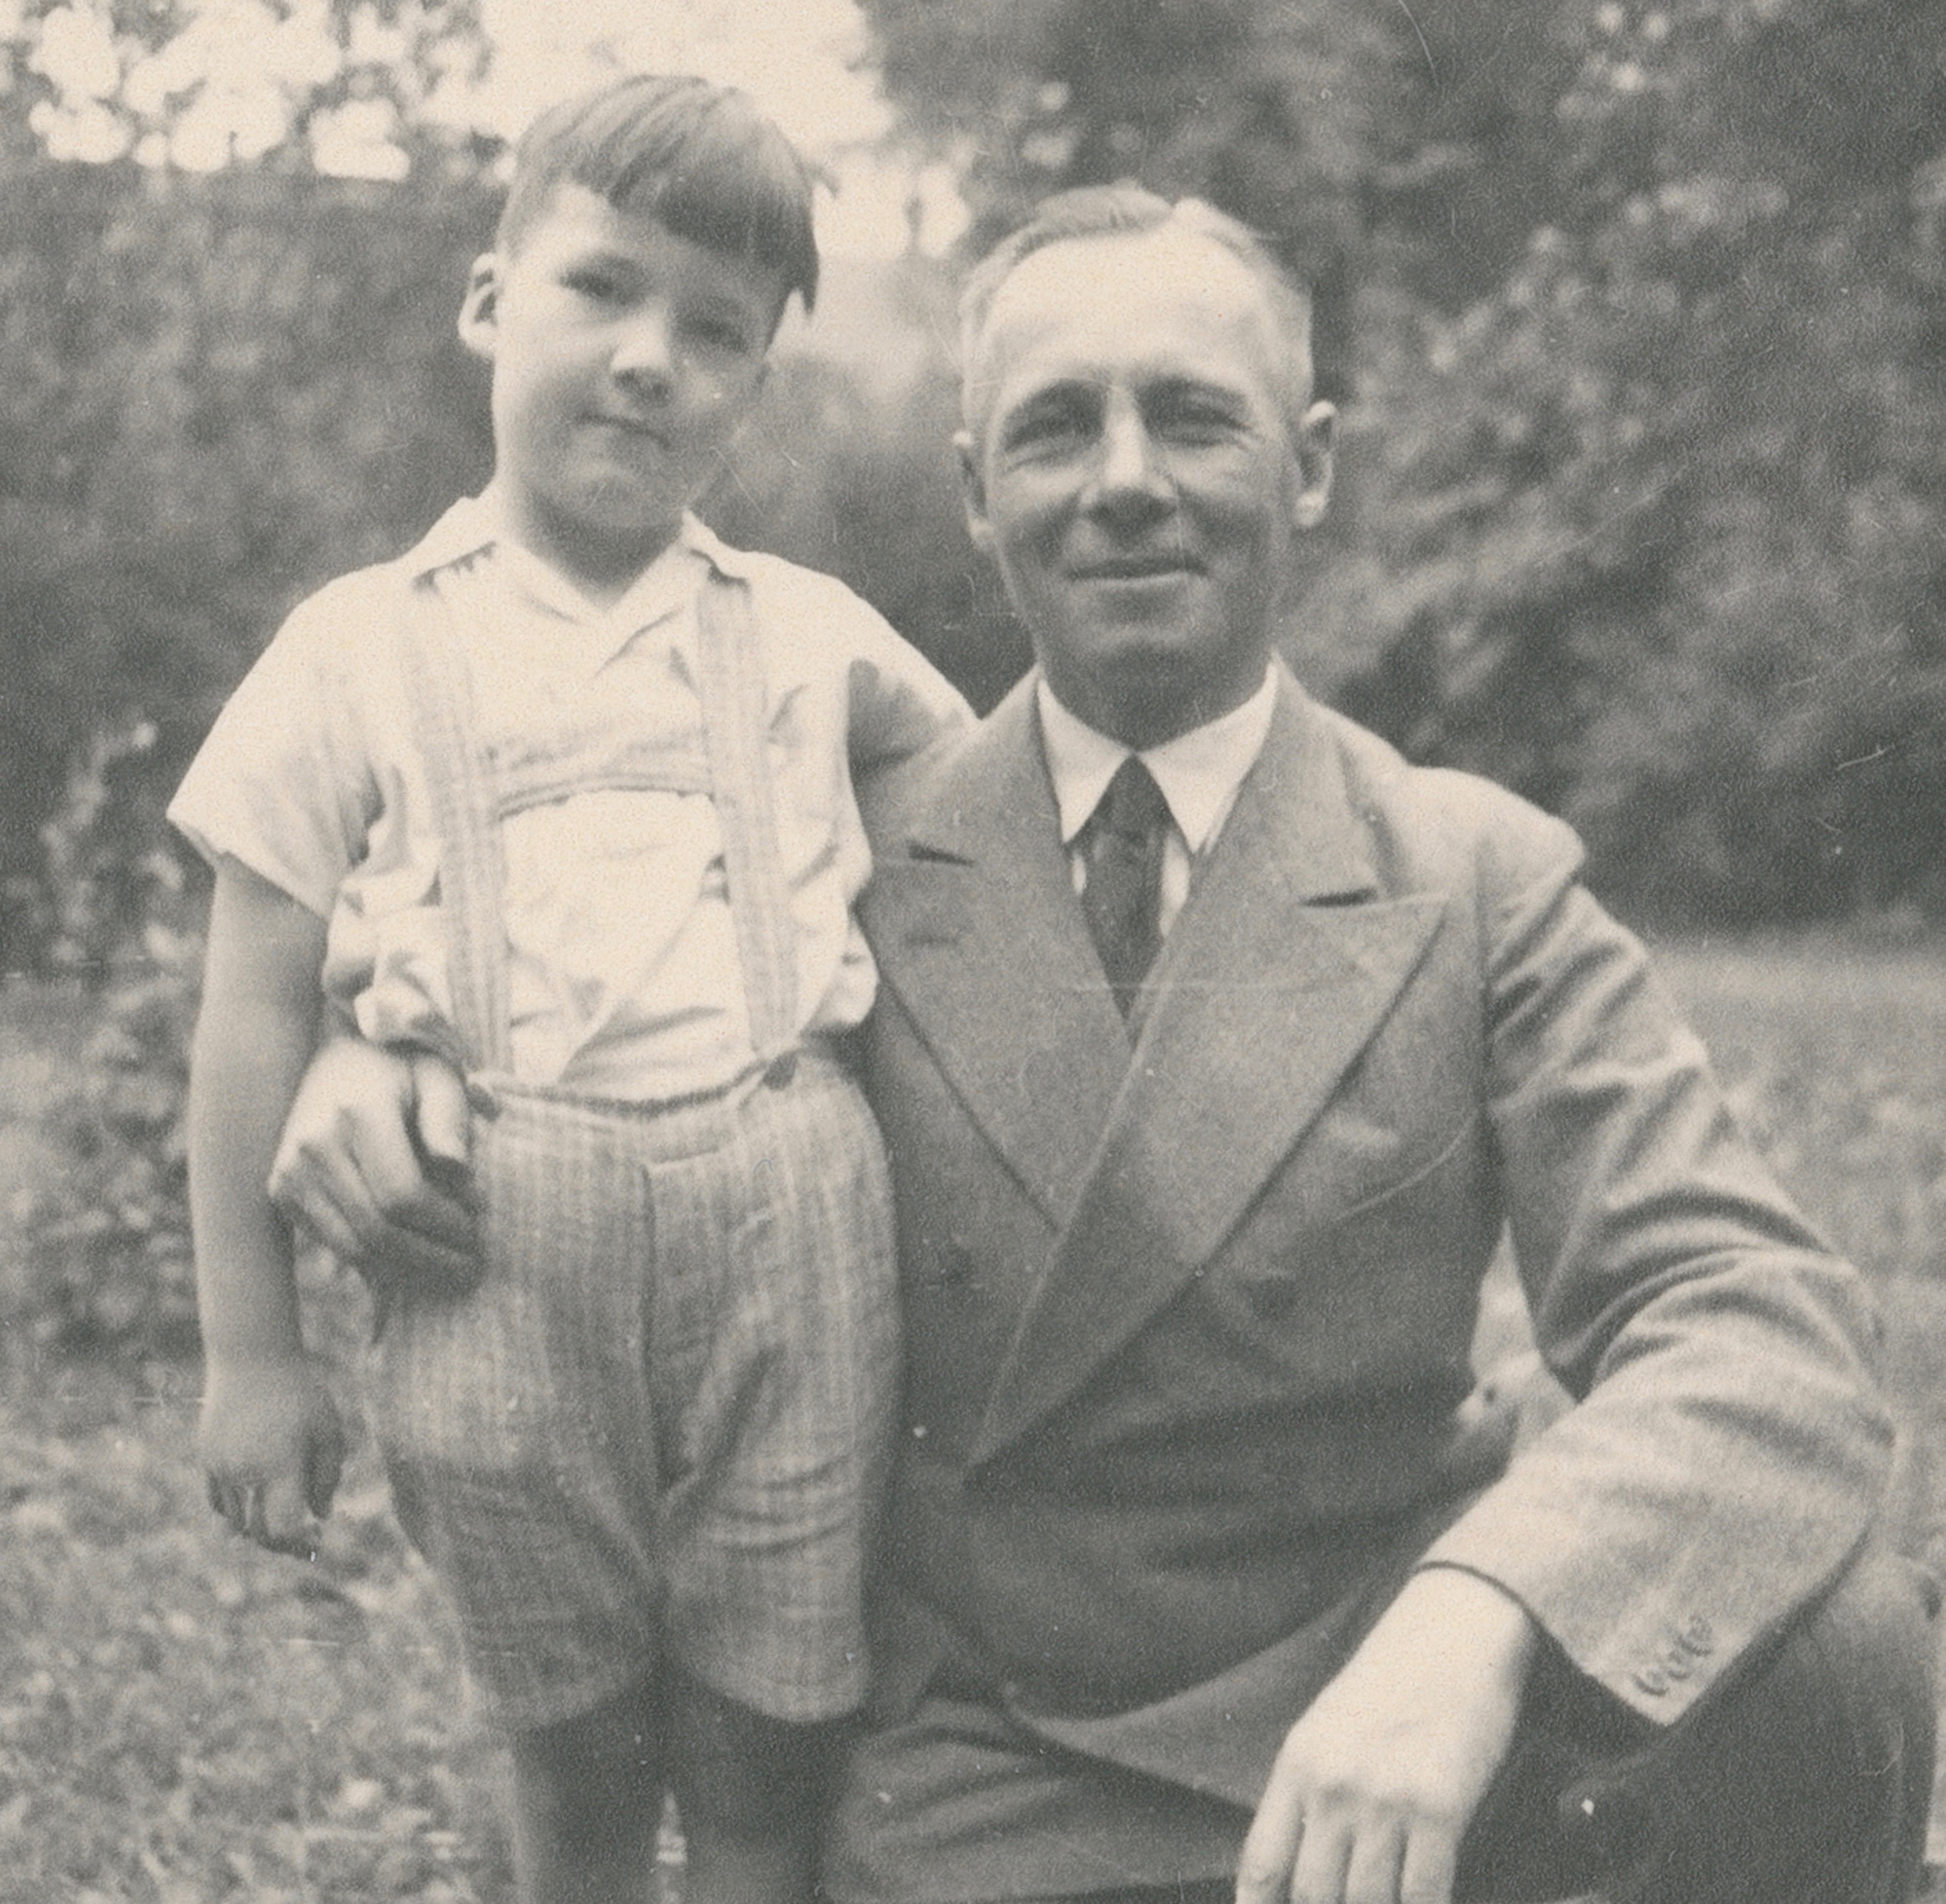  Rommel, in civilian clothing, with his son Manfred in the 1930s. Photo from Rommel's private photo albums, courtesy of the Haus der Geschichte Baden-Württemberg. 